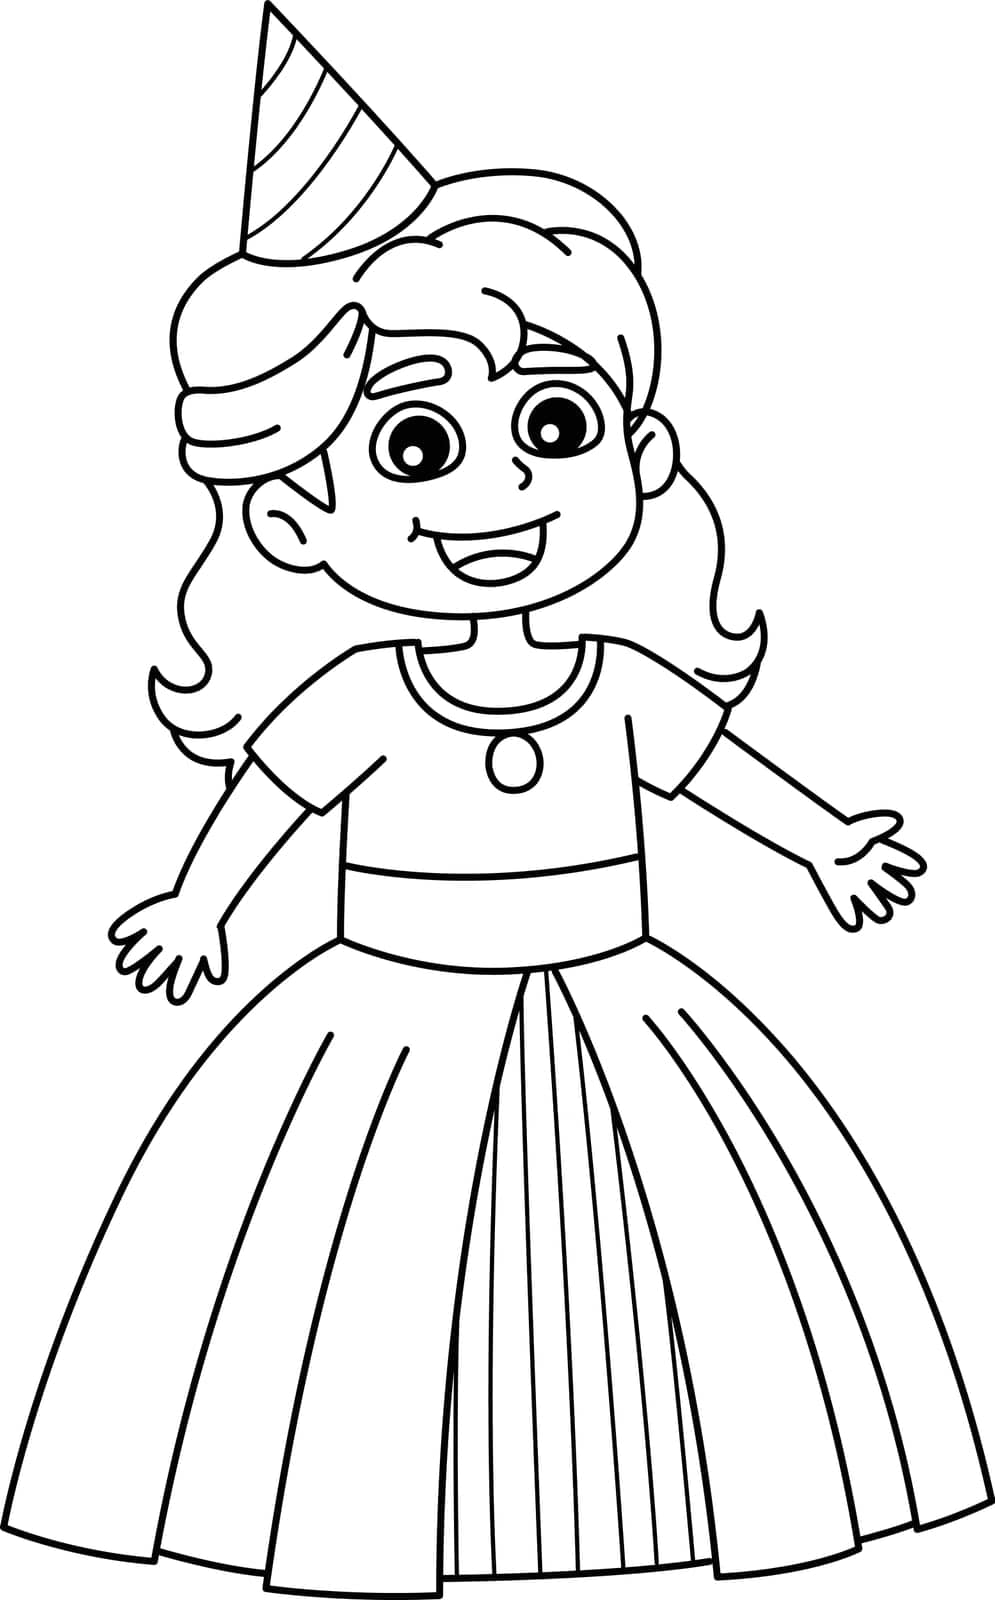 Happy Birthday Princess Isolated Coloring Page by abbydesign